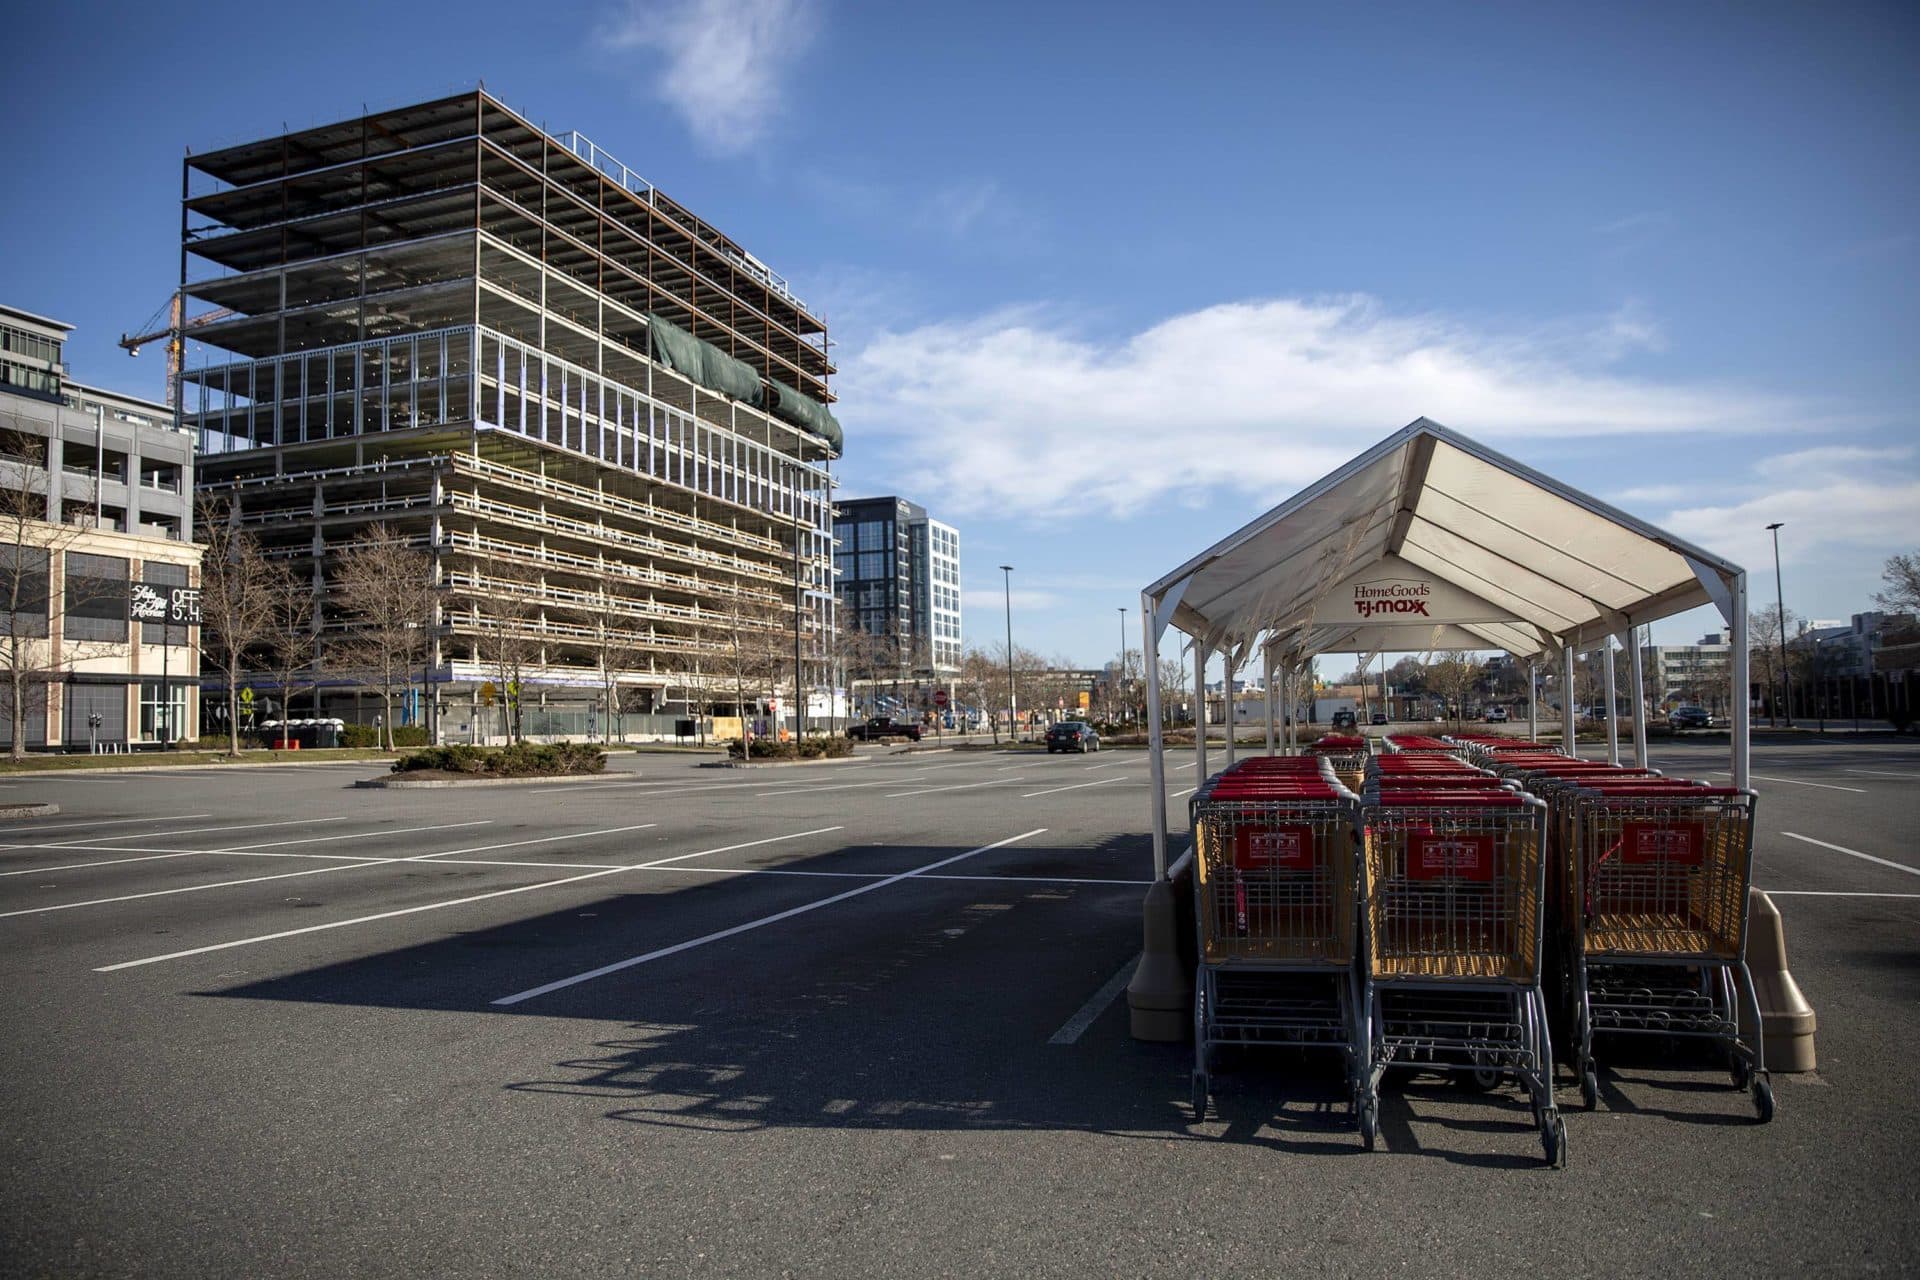 March 26: With stores closed and people staying home to slow the spread of the coronavirus, TJ Maxx carts stand idle in the empty parking lot in front of the store at Assembly Square in Somerville. (Robin Lubbock/WBUR)